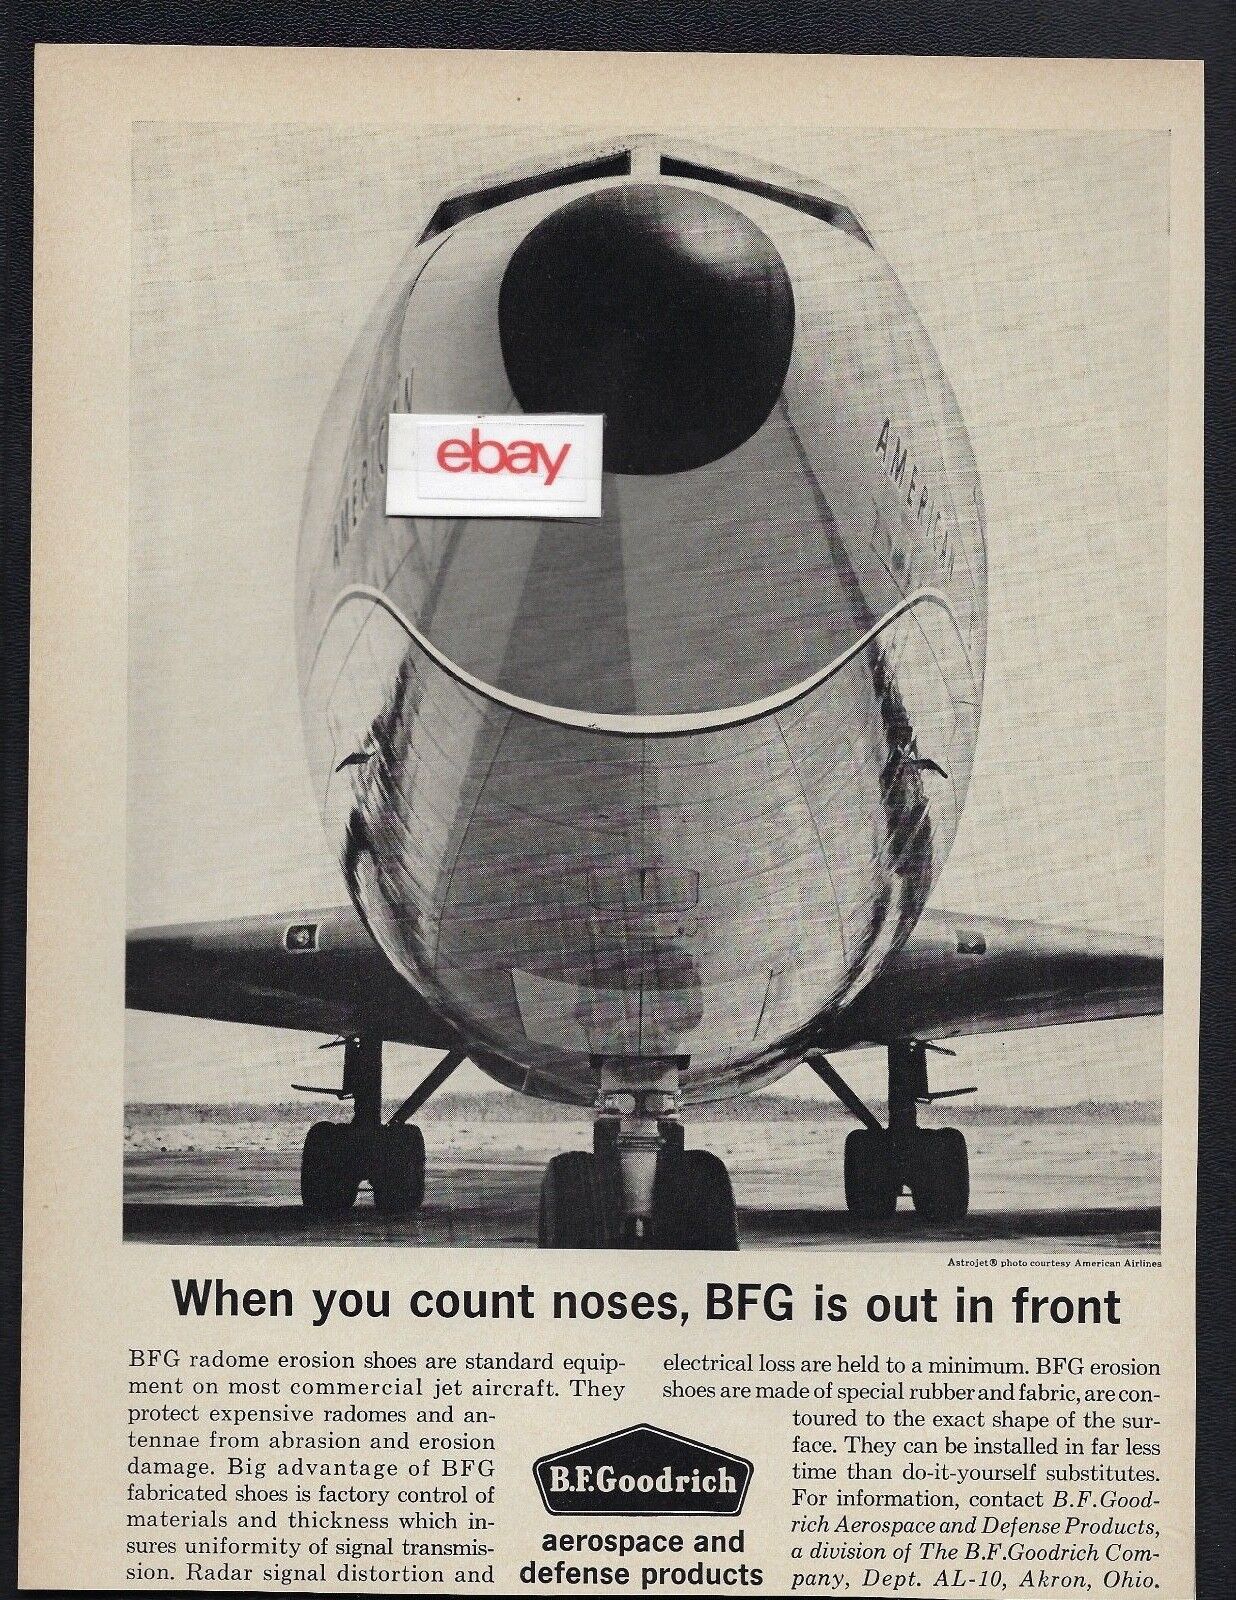 AMERICAN AIRLINES BOEING 707 ASTROJET WHEN YOU COUNT NOSES BF GOODRICH RADOME AD